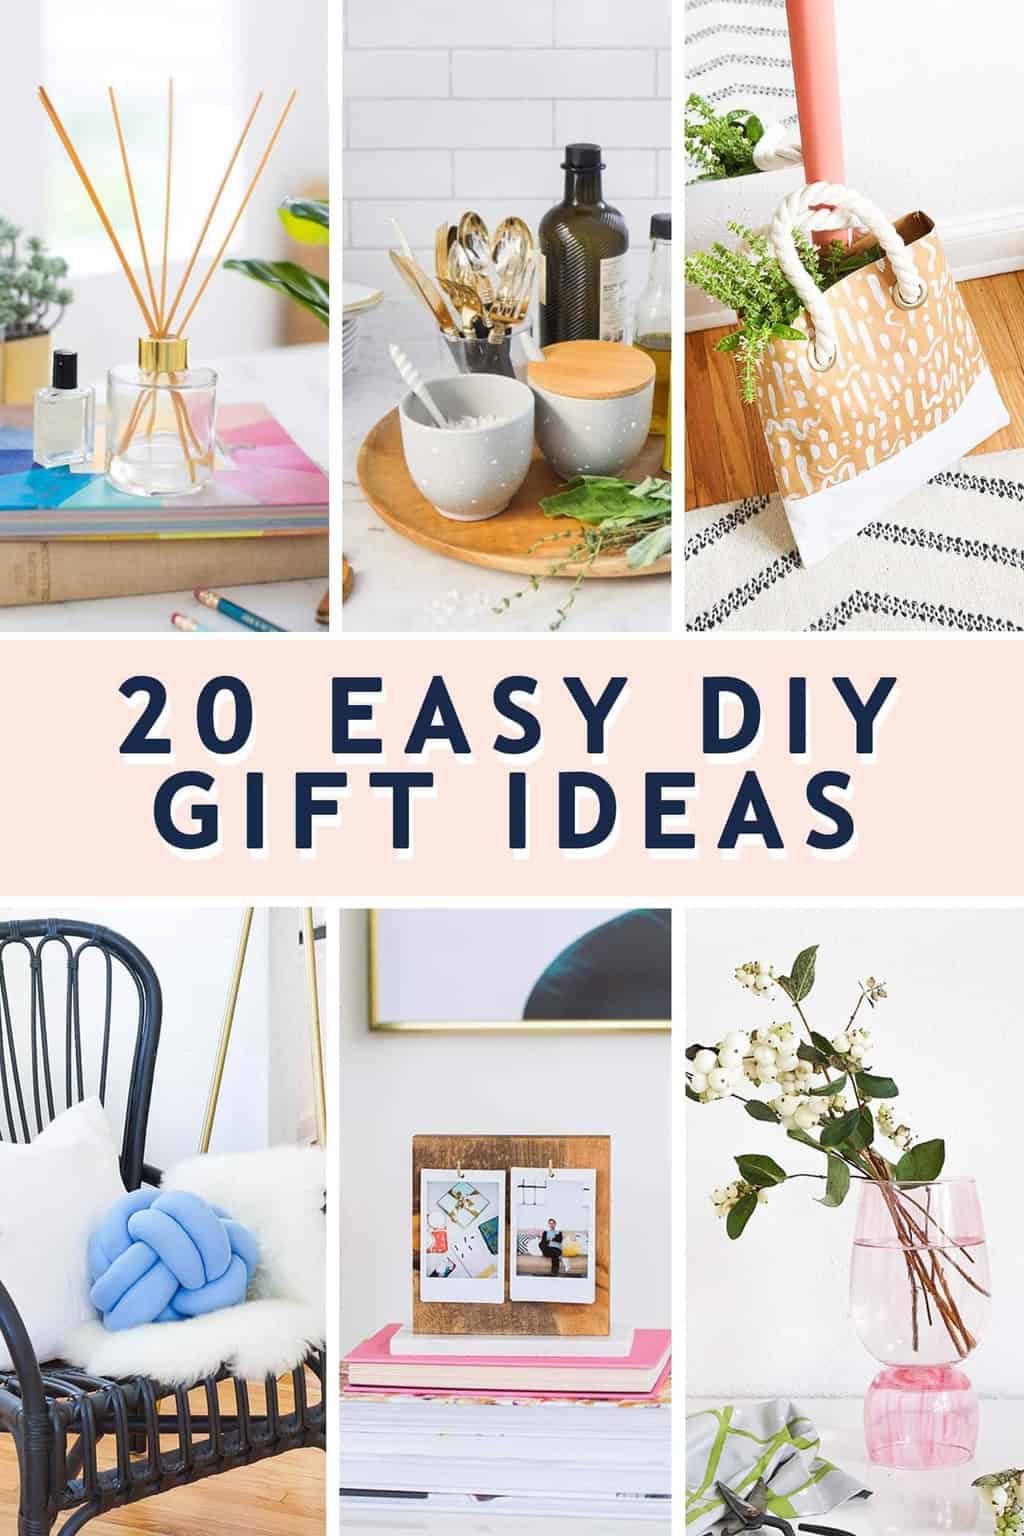 photo of 20 easy diy gift ideas by top Houston lifestyle blogger Ashley Rose of Sugar & Cloth